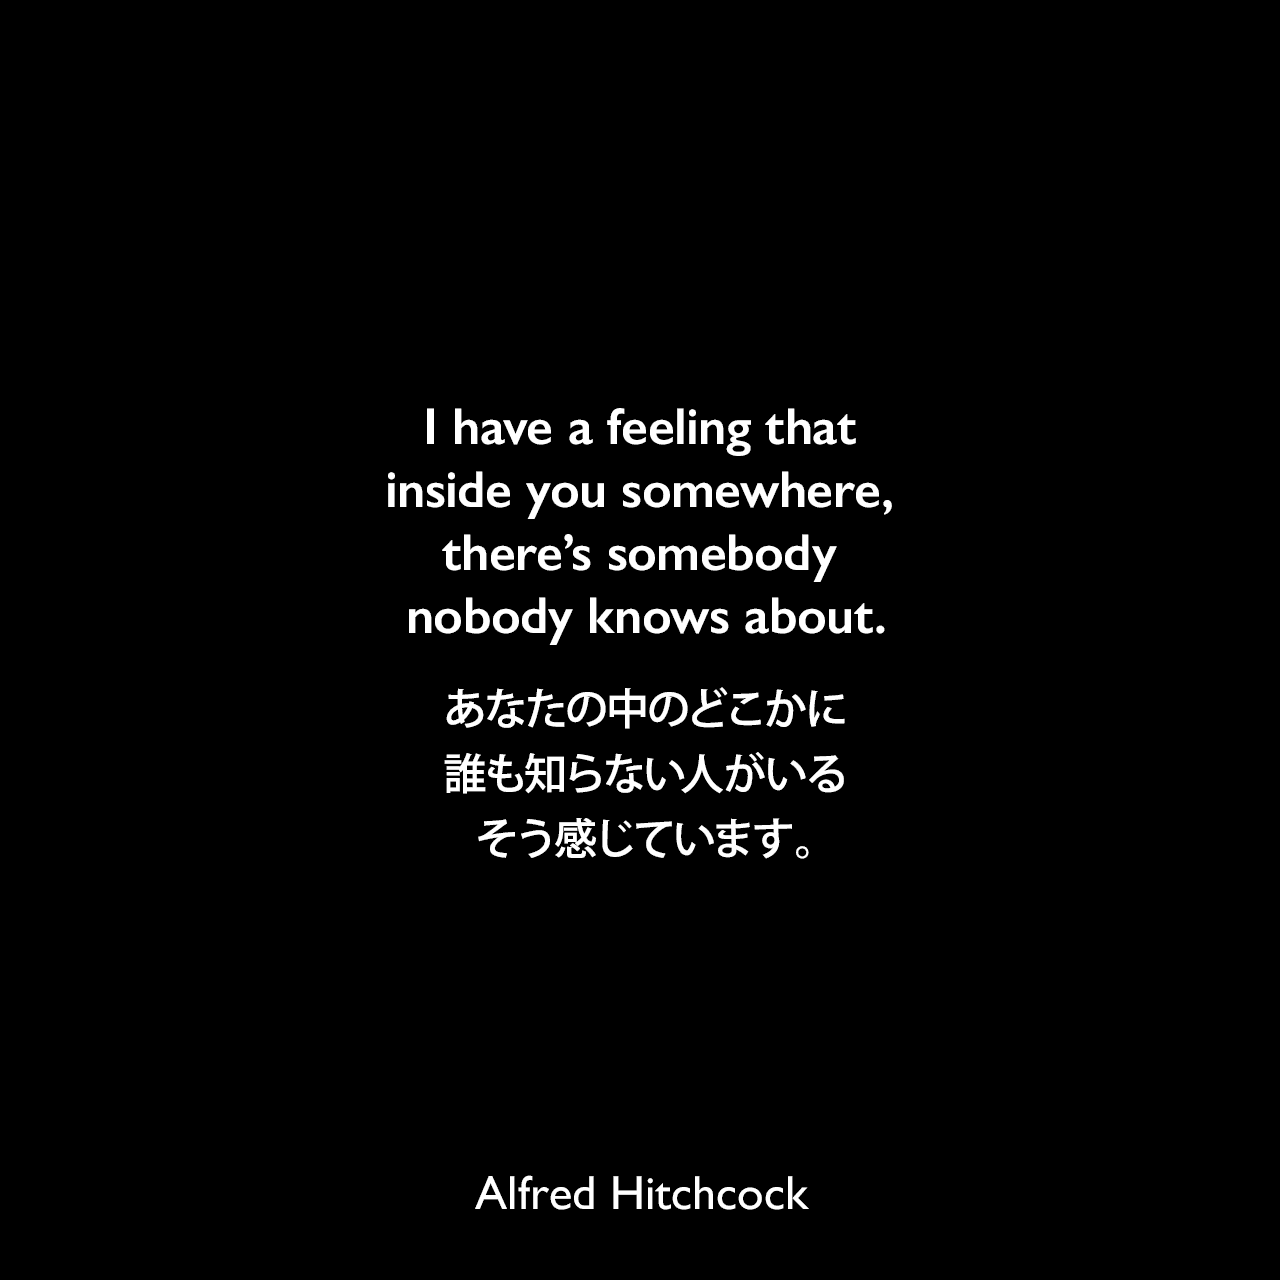 I have a feeling that inside you somewhere, there’s somebody nobody knows about.あなたの中のどこかに誰も知らない人がいる、そう感じています。Alfred Hitchcock